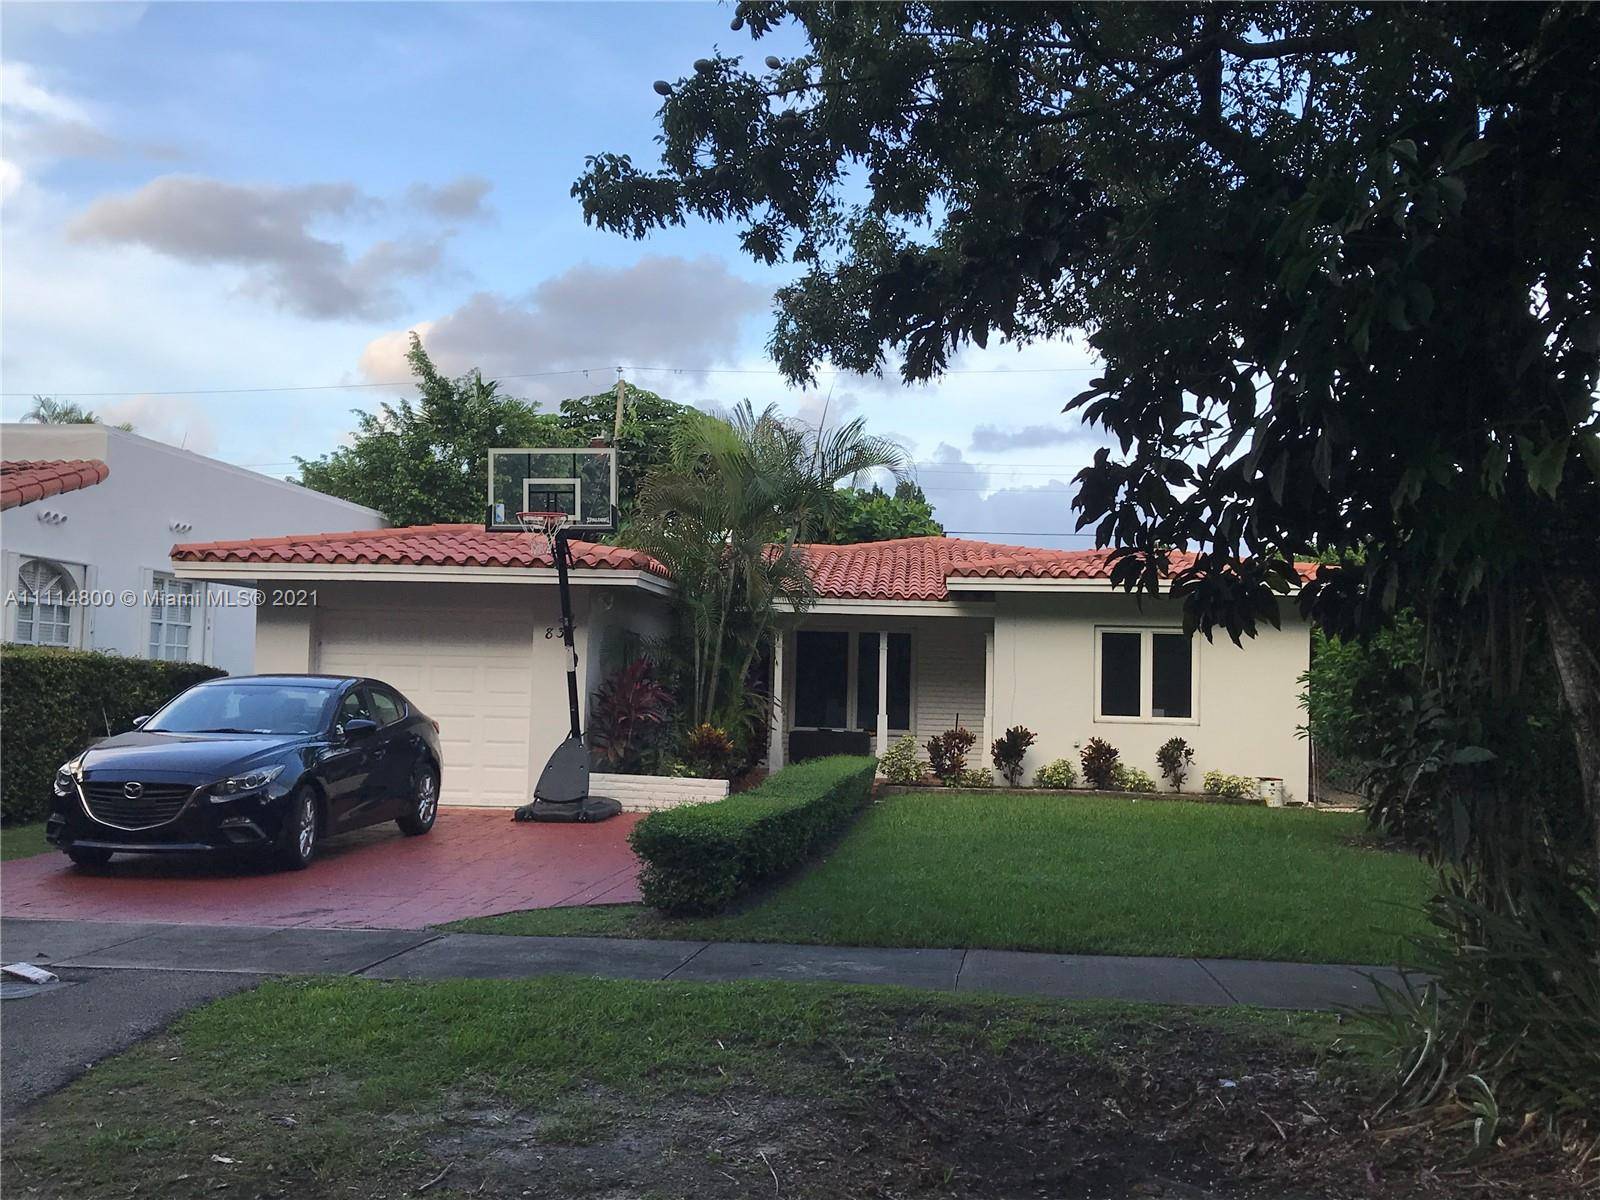 This Charming Coral Gables single family home sits on a quiet street among a beautiful canopy of mature Oak lined trees.